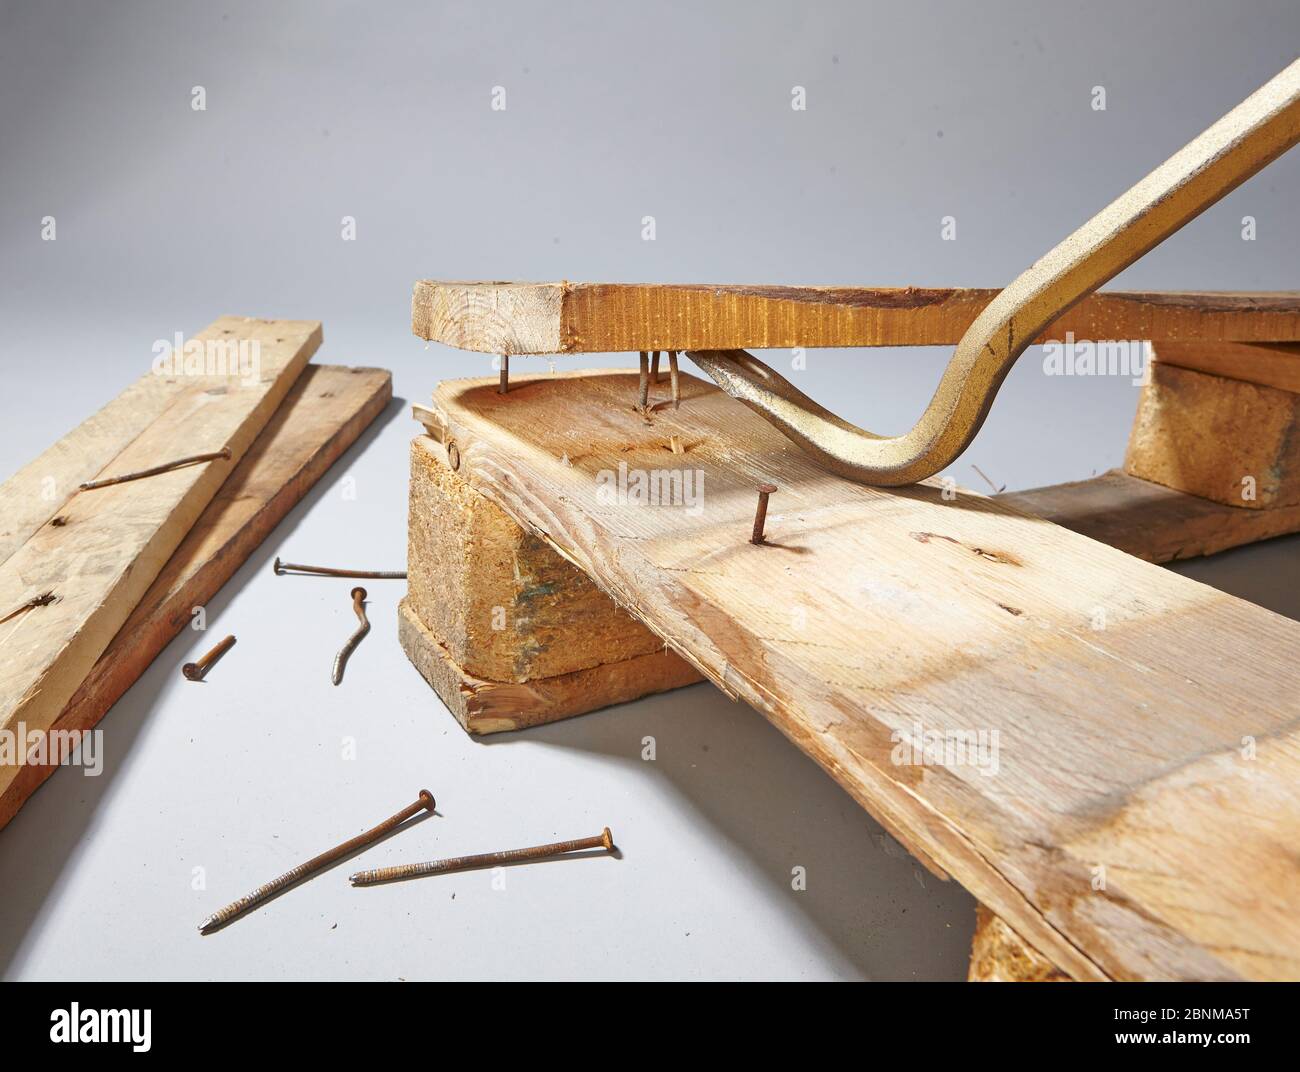 Construction of a shelf made of wood, Euro pallet, solid wood, MDF board; Do-it-yourself production, step-by-step, step 1 disassembly of the euro pallet, disassembly into individual parts with crowbar, pull out nail with nail iron Stock Photo